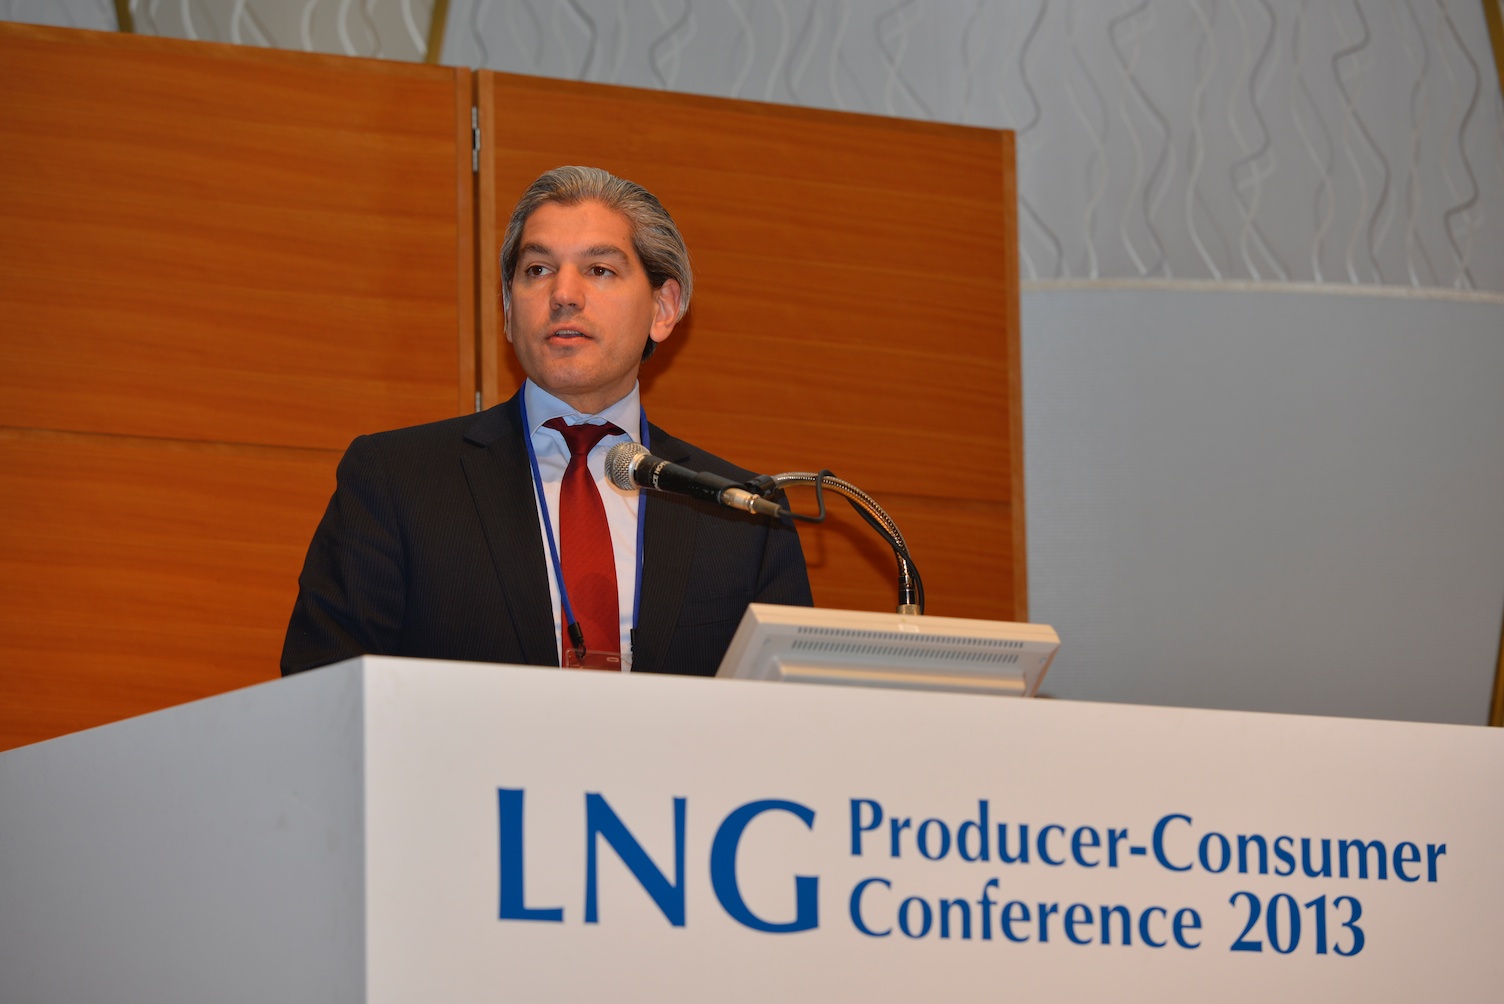 LNG Producer Consumer Conference 2013  (1)  09 10 2013